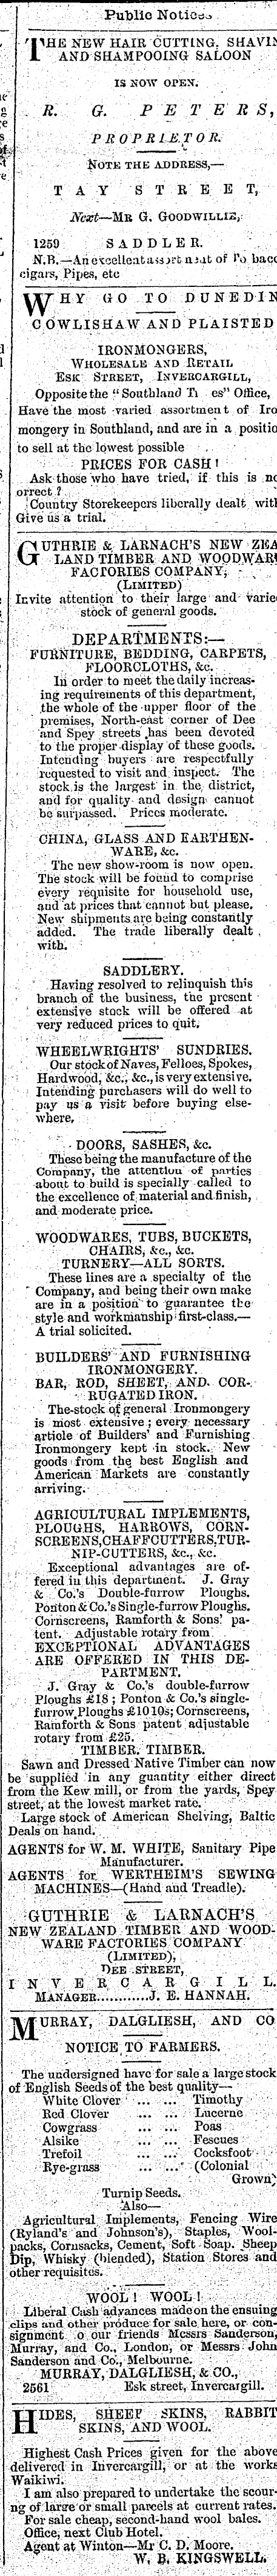 Papers Past Newspapers Southland Times 25 October 1879 Page 1 Advertisements Column 5